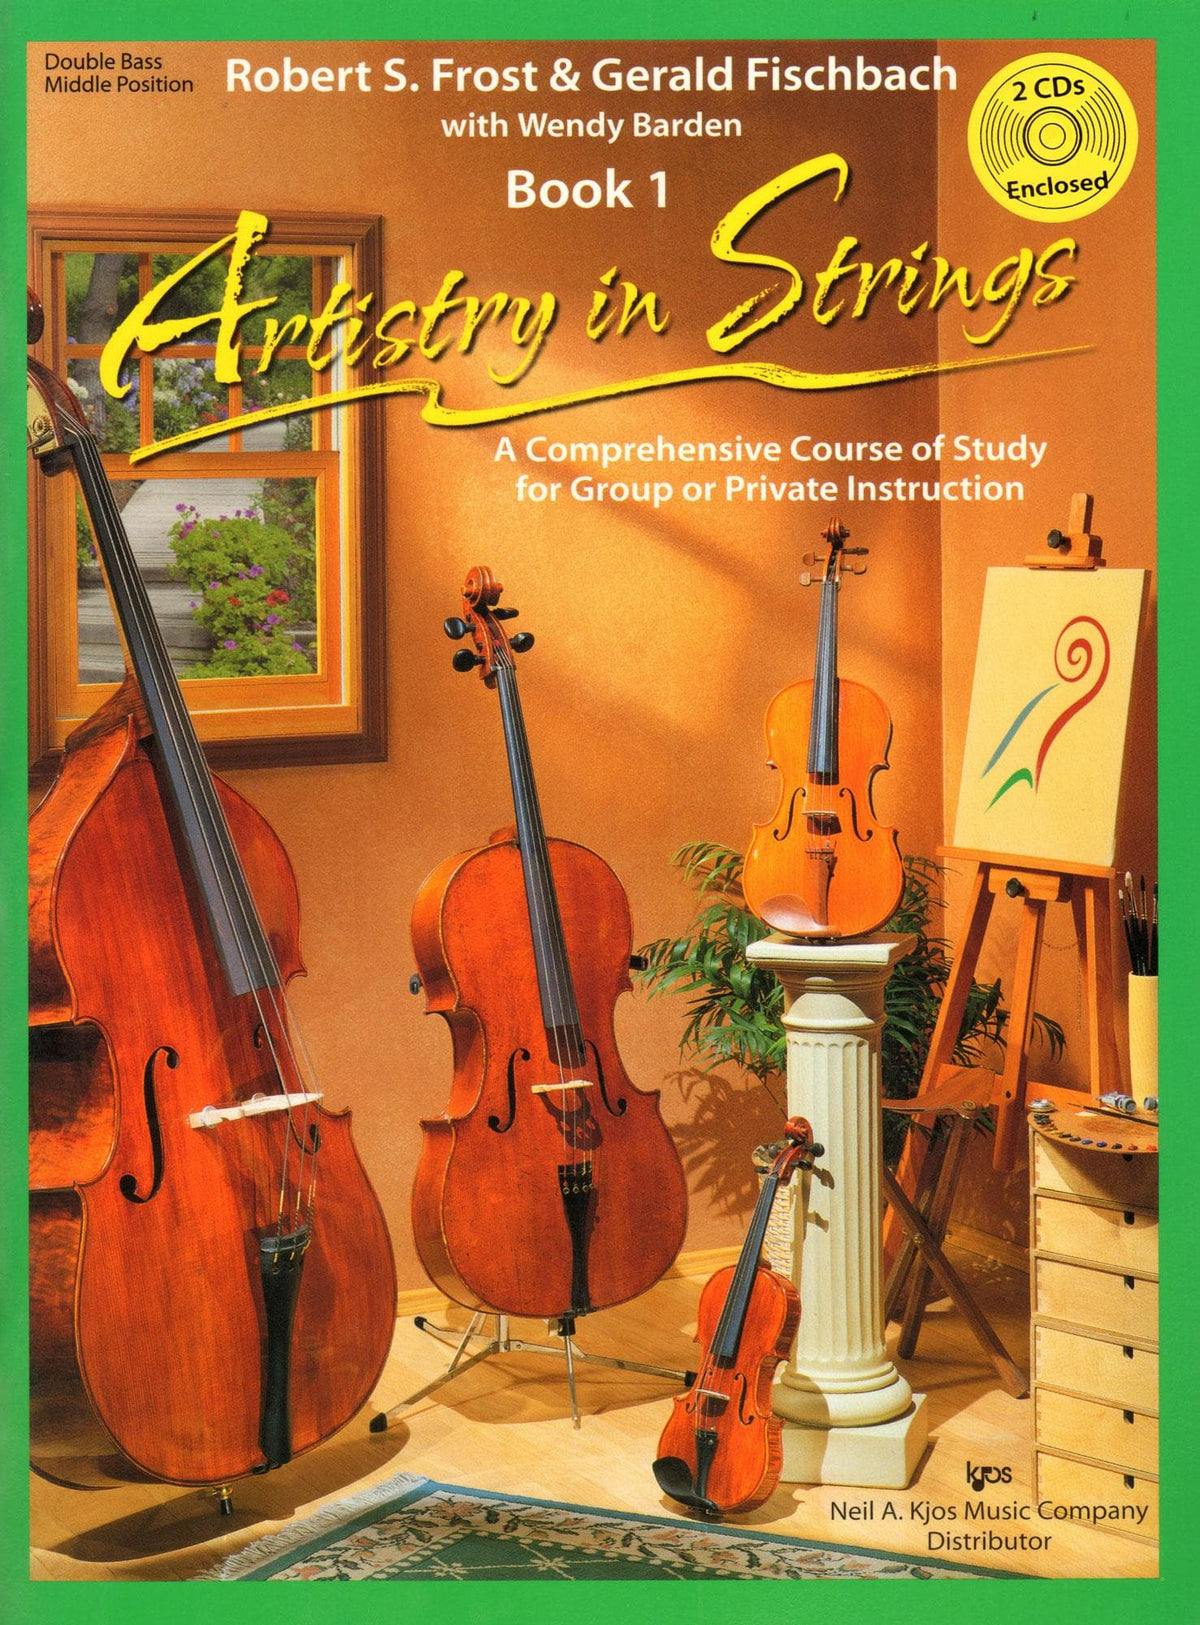 Frost/Fischbach/Barden - Artistry in Strings, Book 1 - Bass (Middle Position) - Book/2-CD set - Neil A Kjos Music Co